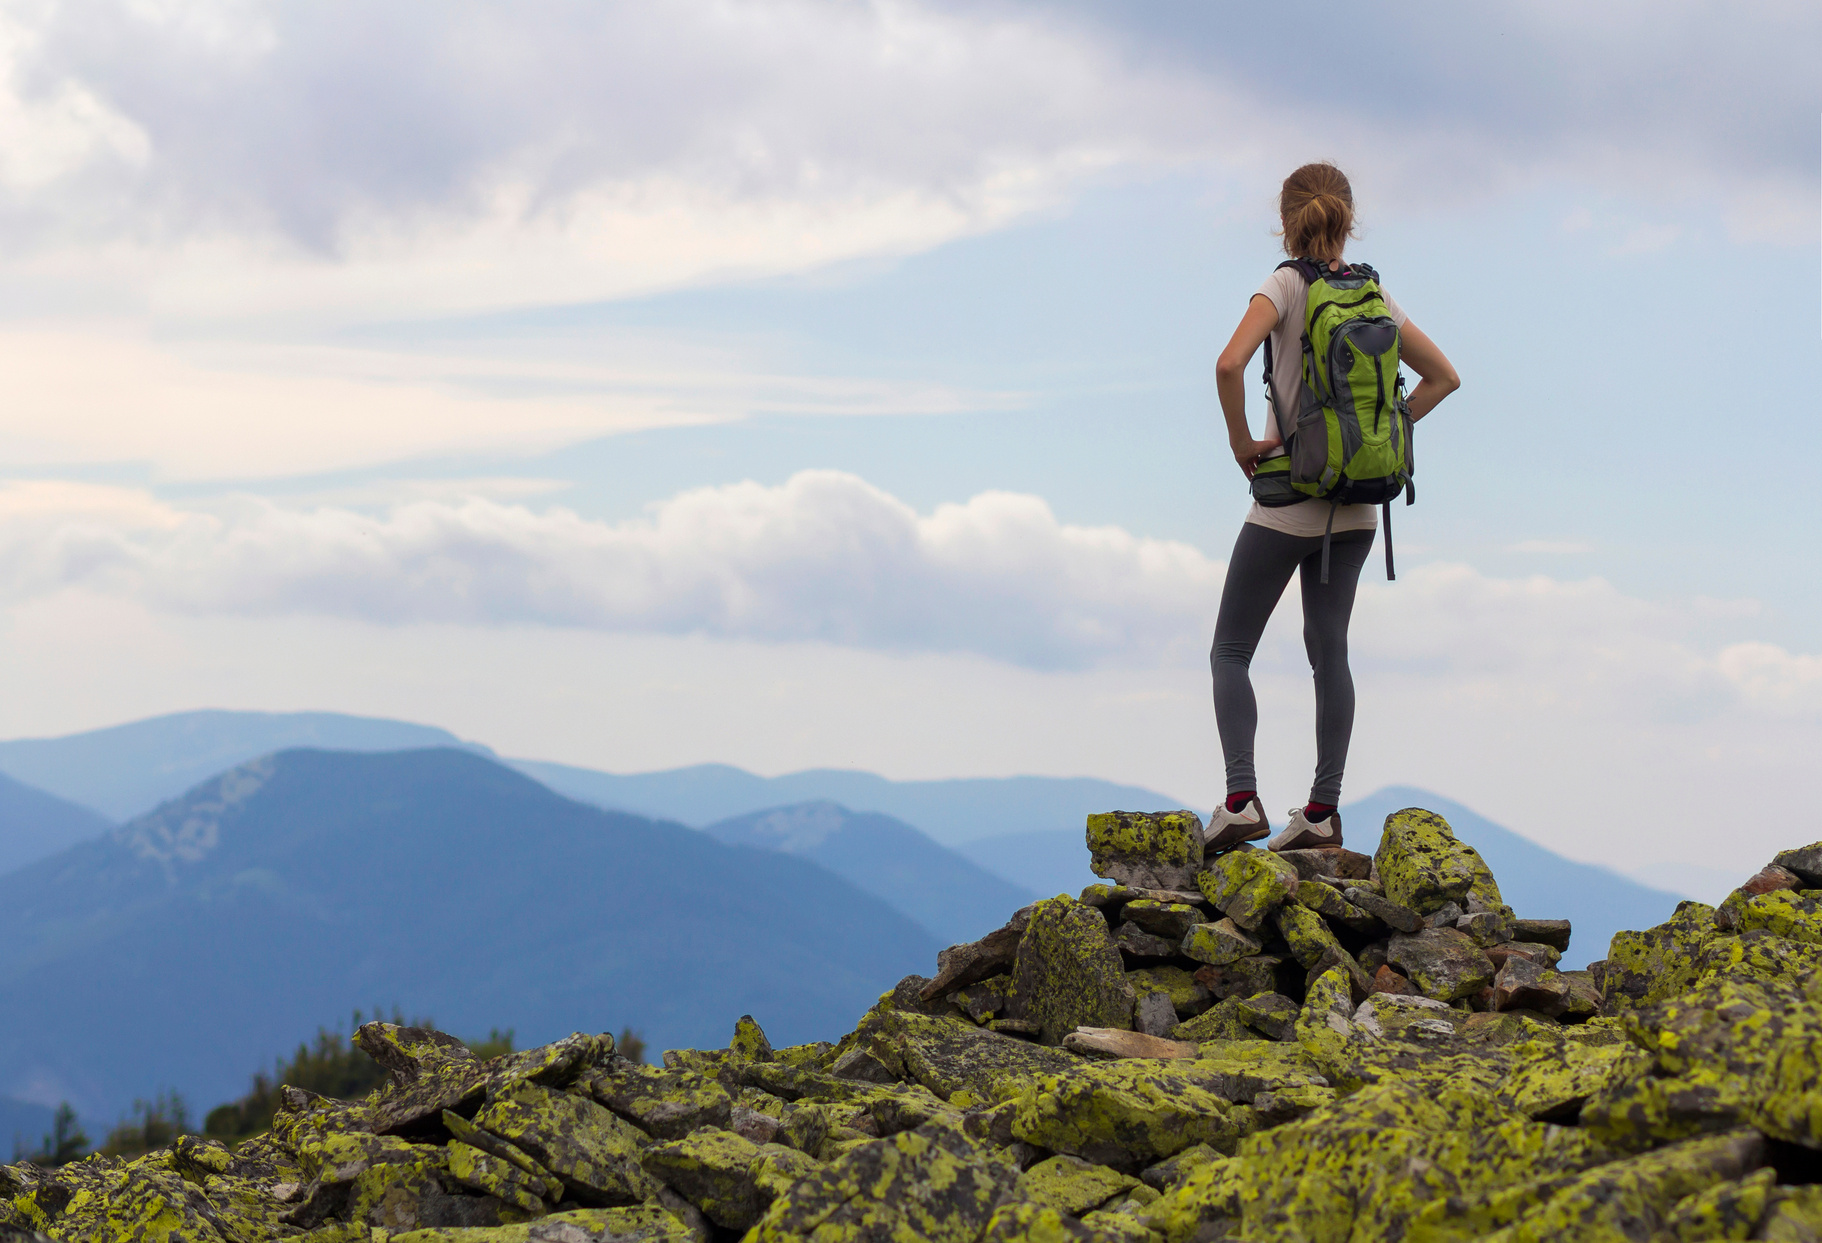 Back view of young slim girl with backpacks standing on rocky mountain top against bright blue morning sky enjoying foggy mountain range panorama. Tourism, traveling and healthy lifestyle concept.